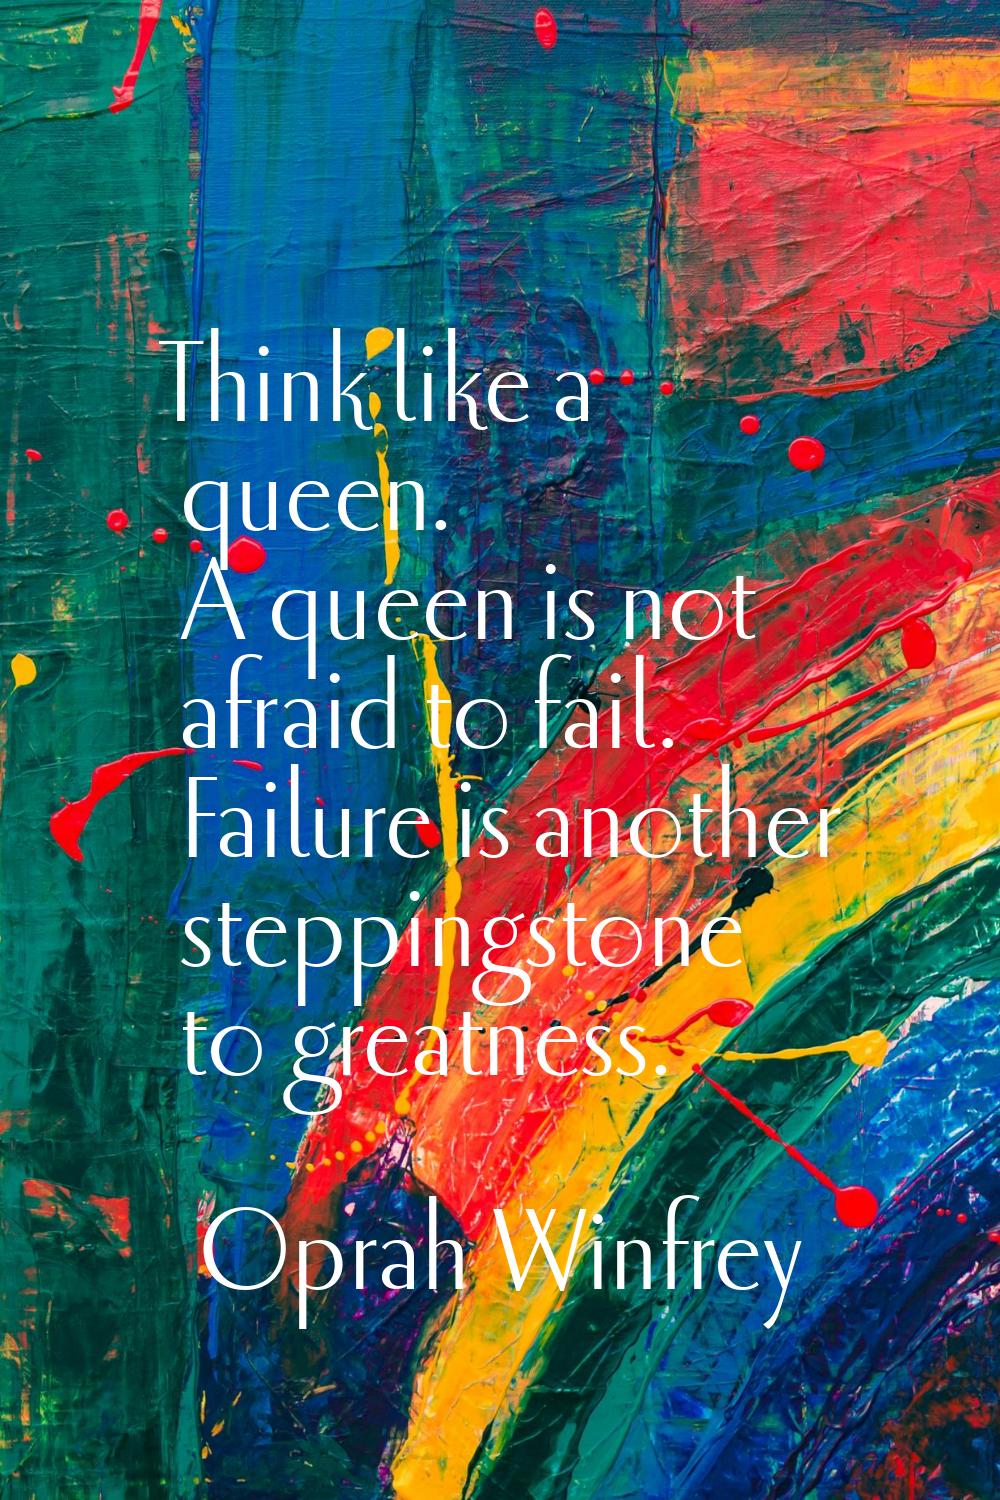 Think like a queen. A queen is not afraid to fail. Failure is another steppingstone to greatness.